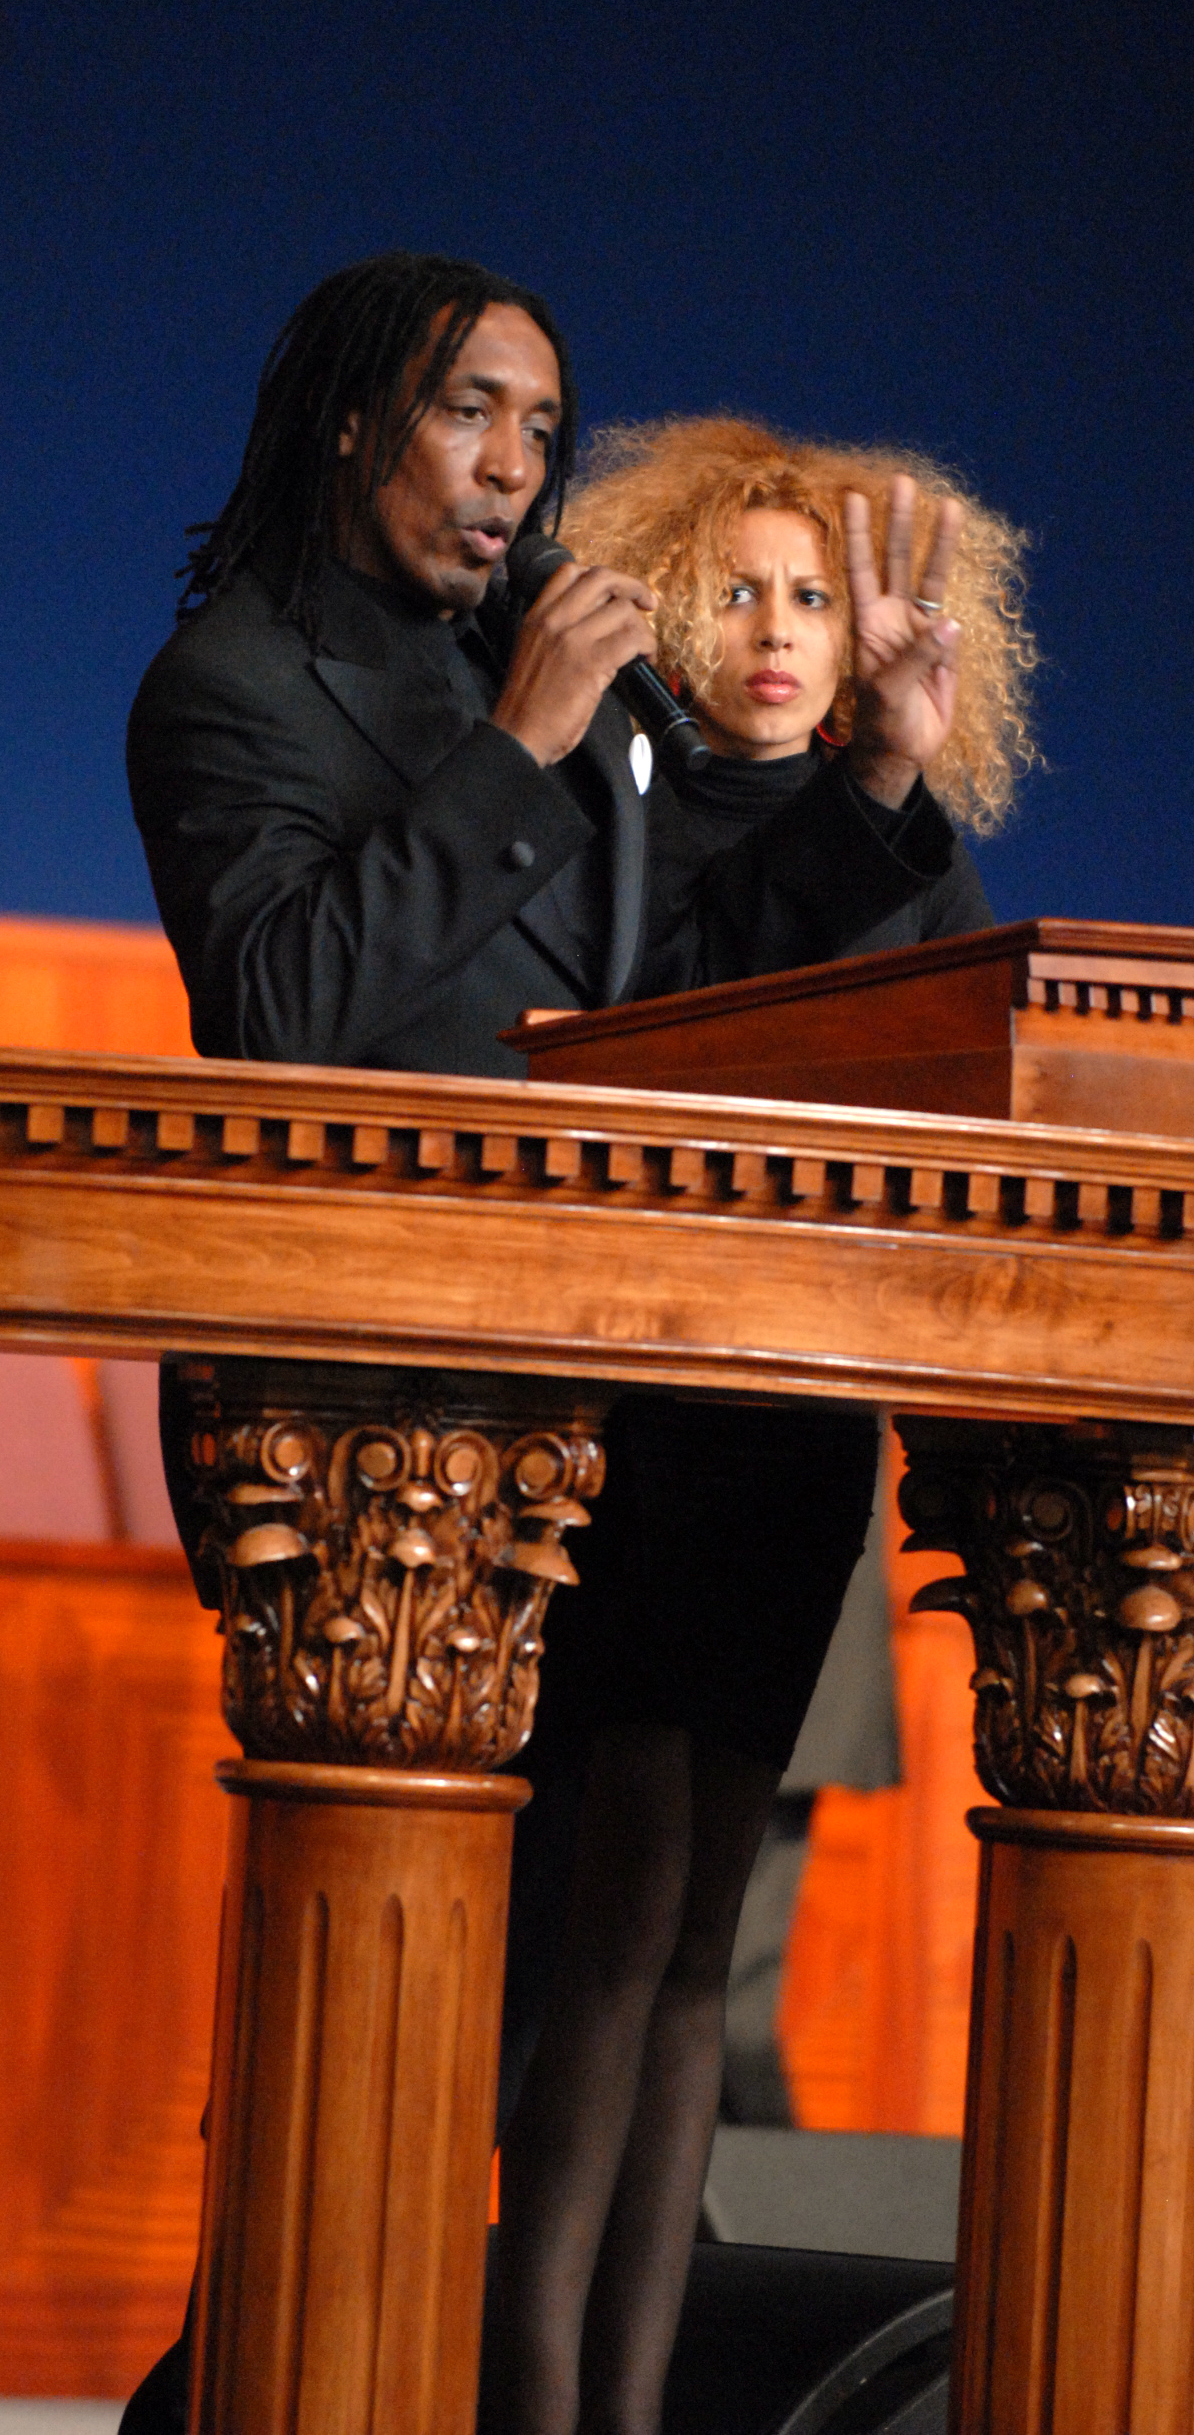 Ronald Turner, son of Ike and Tina Turner, speaks to the congregation with his wife at his side, during a memorial service for singer and musician Ike Turner on December 21, 2007. | Source: Getty Images